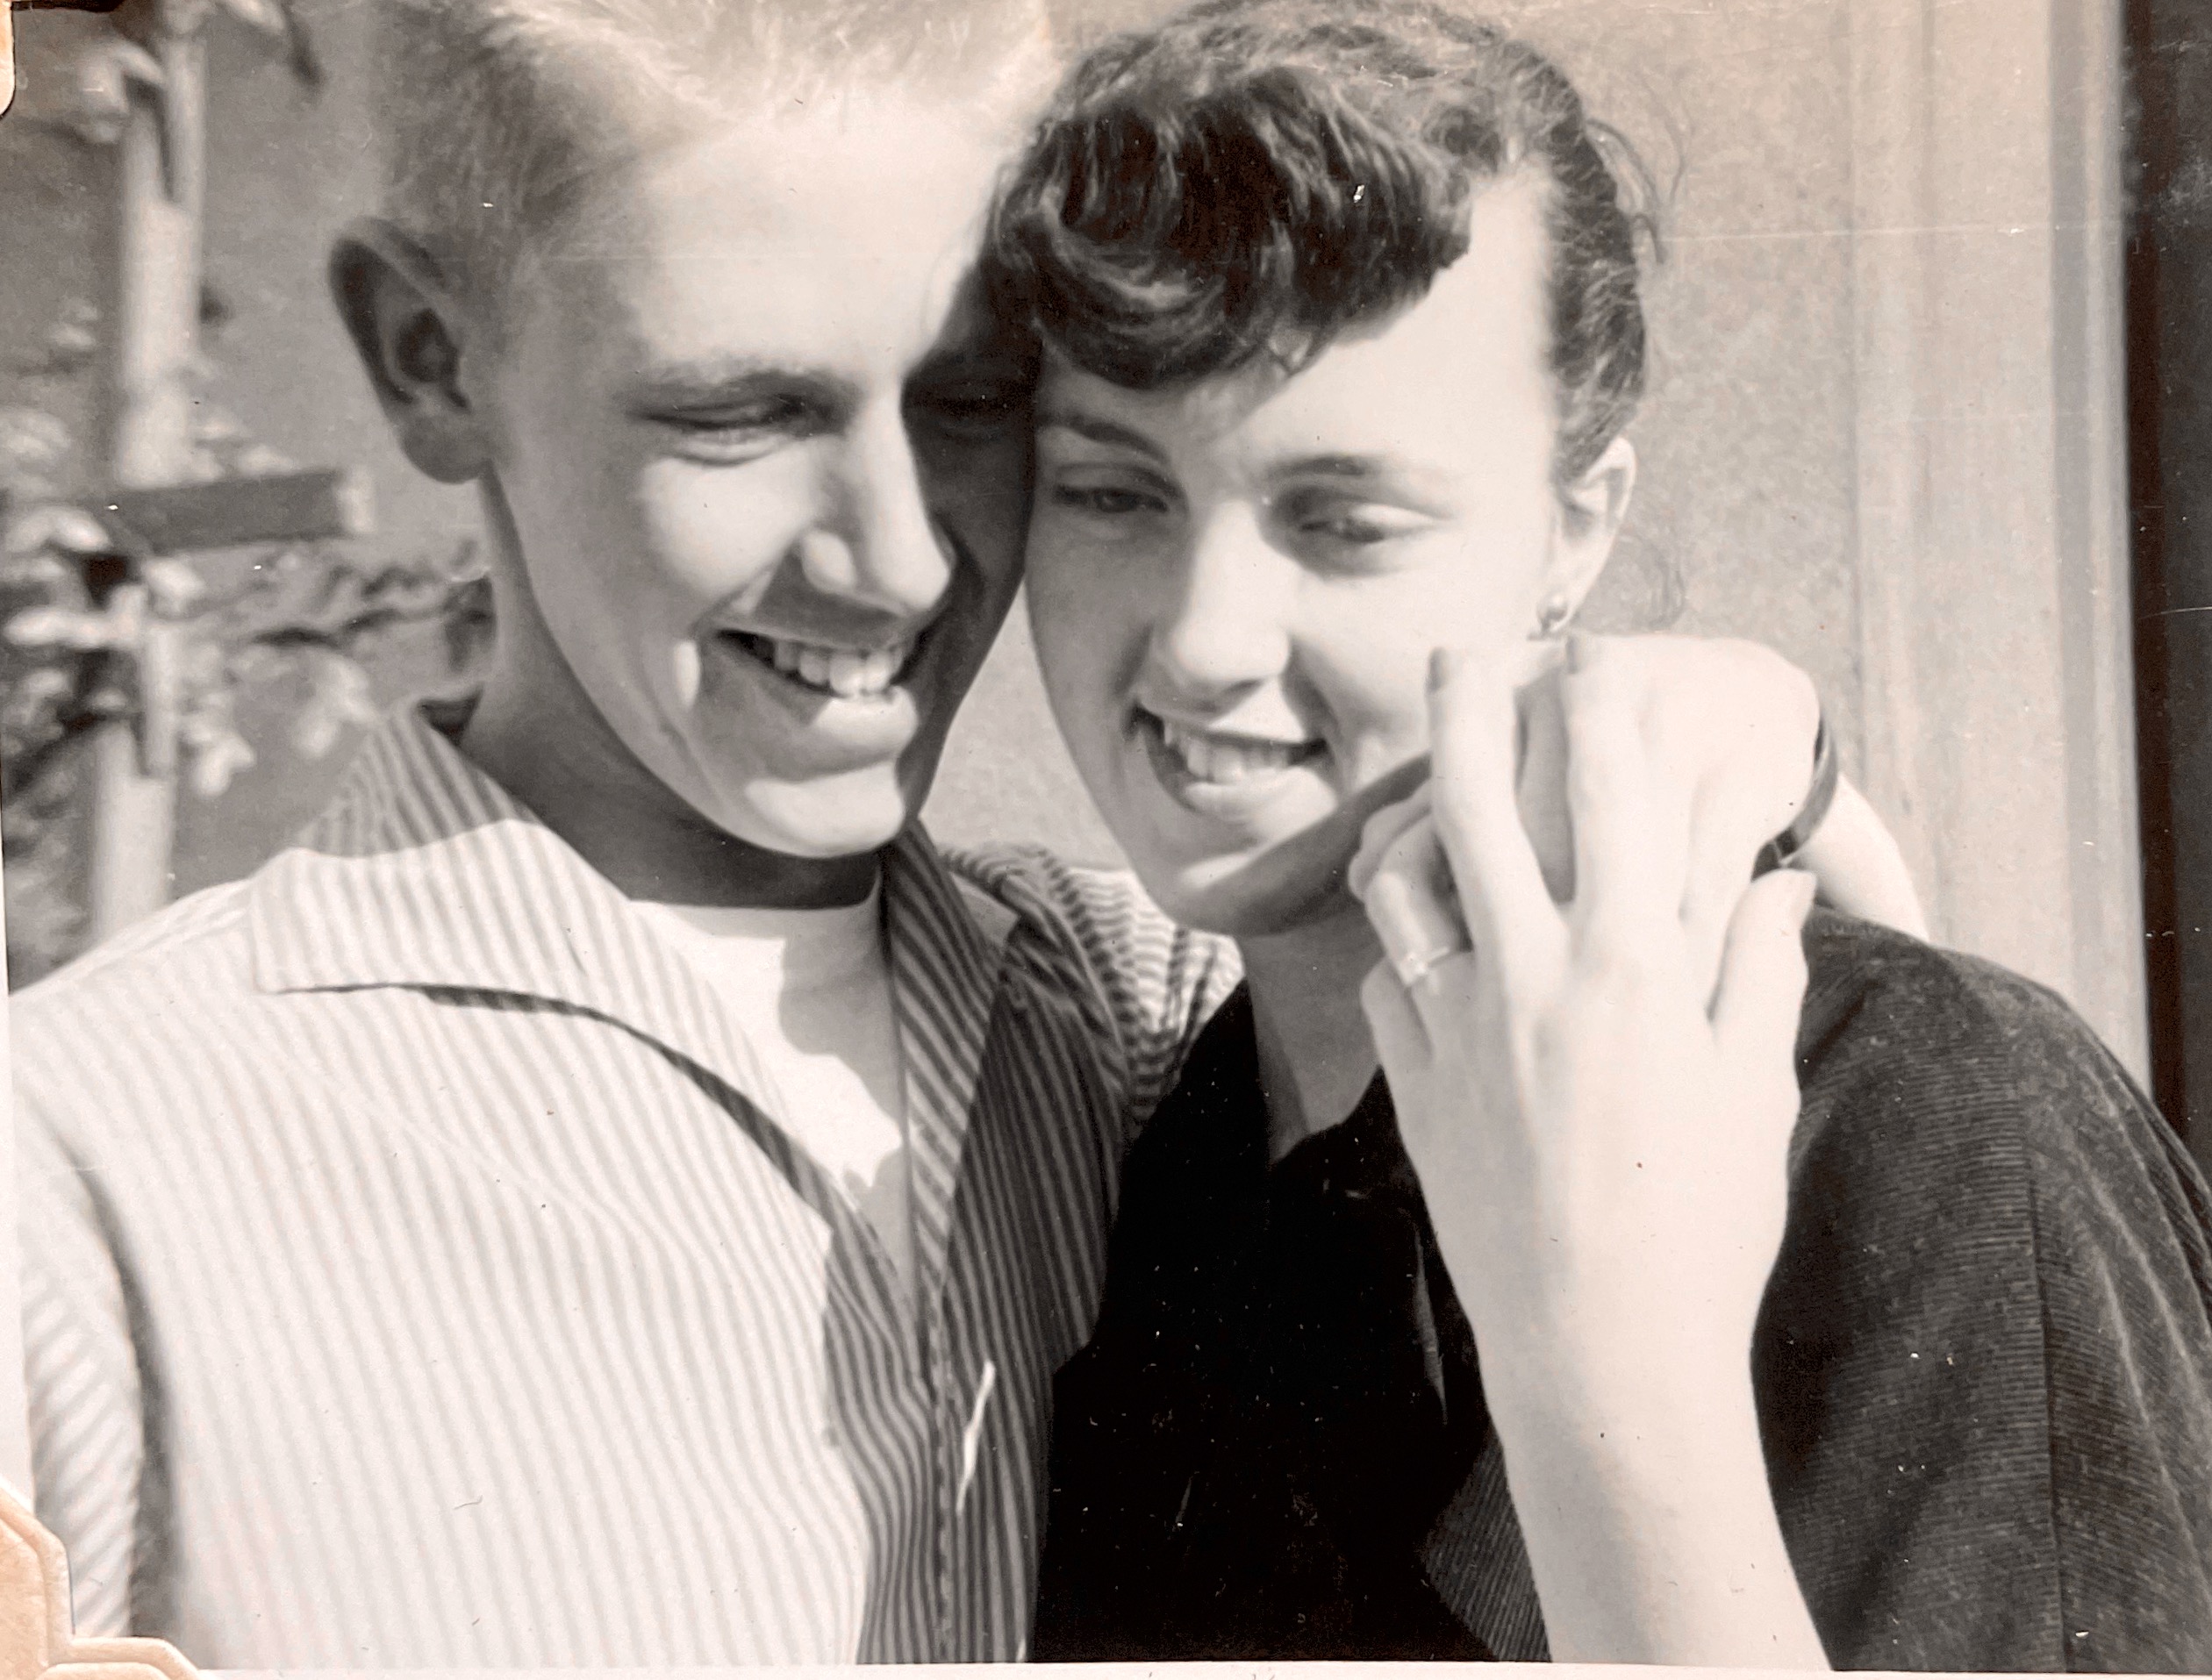 Christmas of 1955. Our engagement.
Bob & Marilyn
